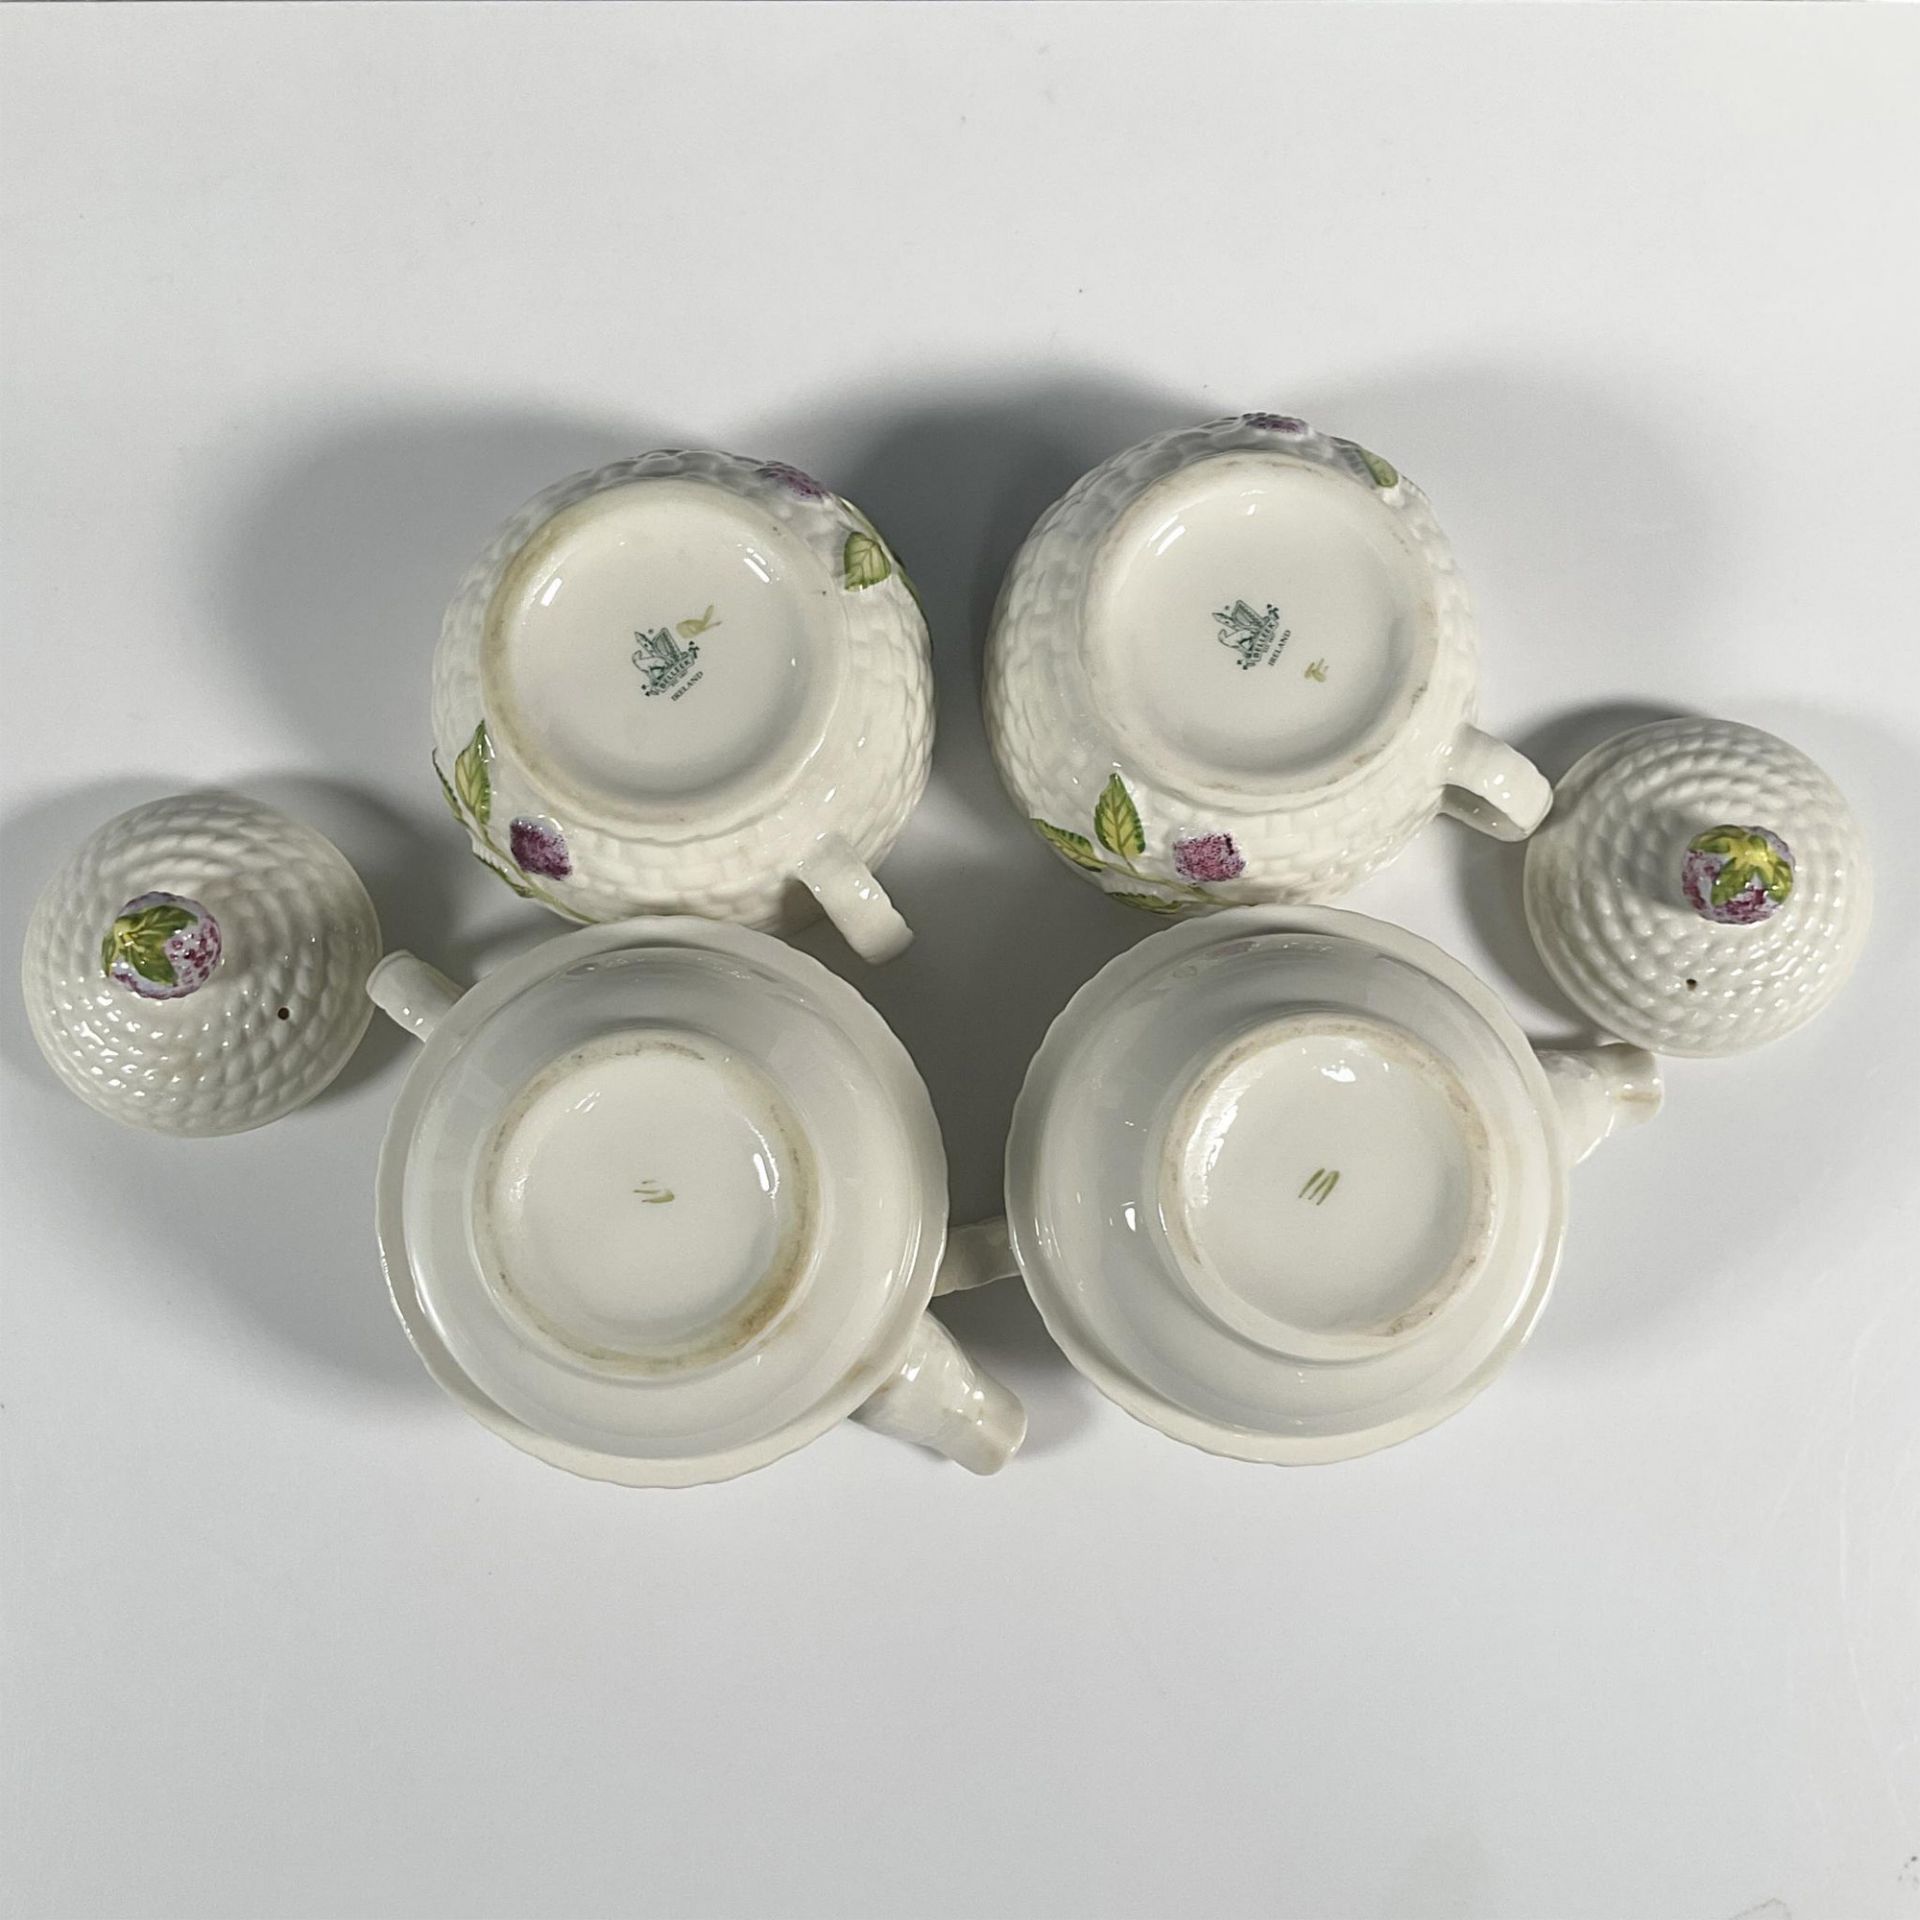 4pc of Belleek Porcelain Lidded Teapots with Cups Set - Image 7 of 7